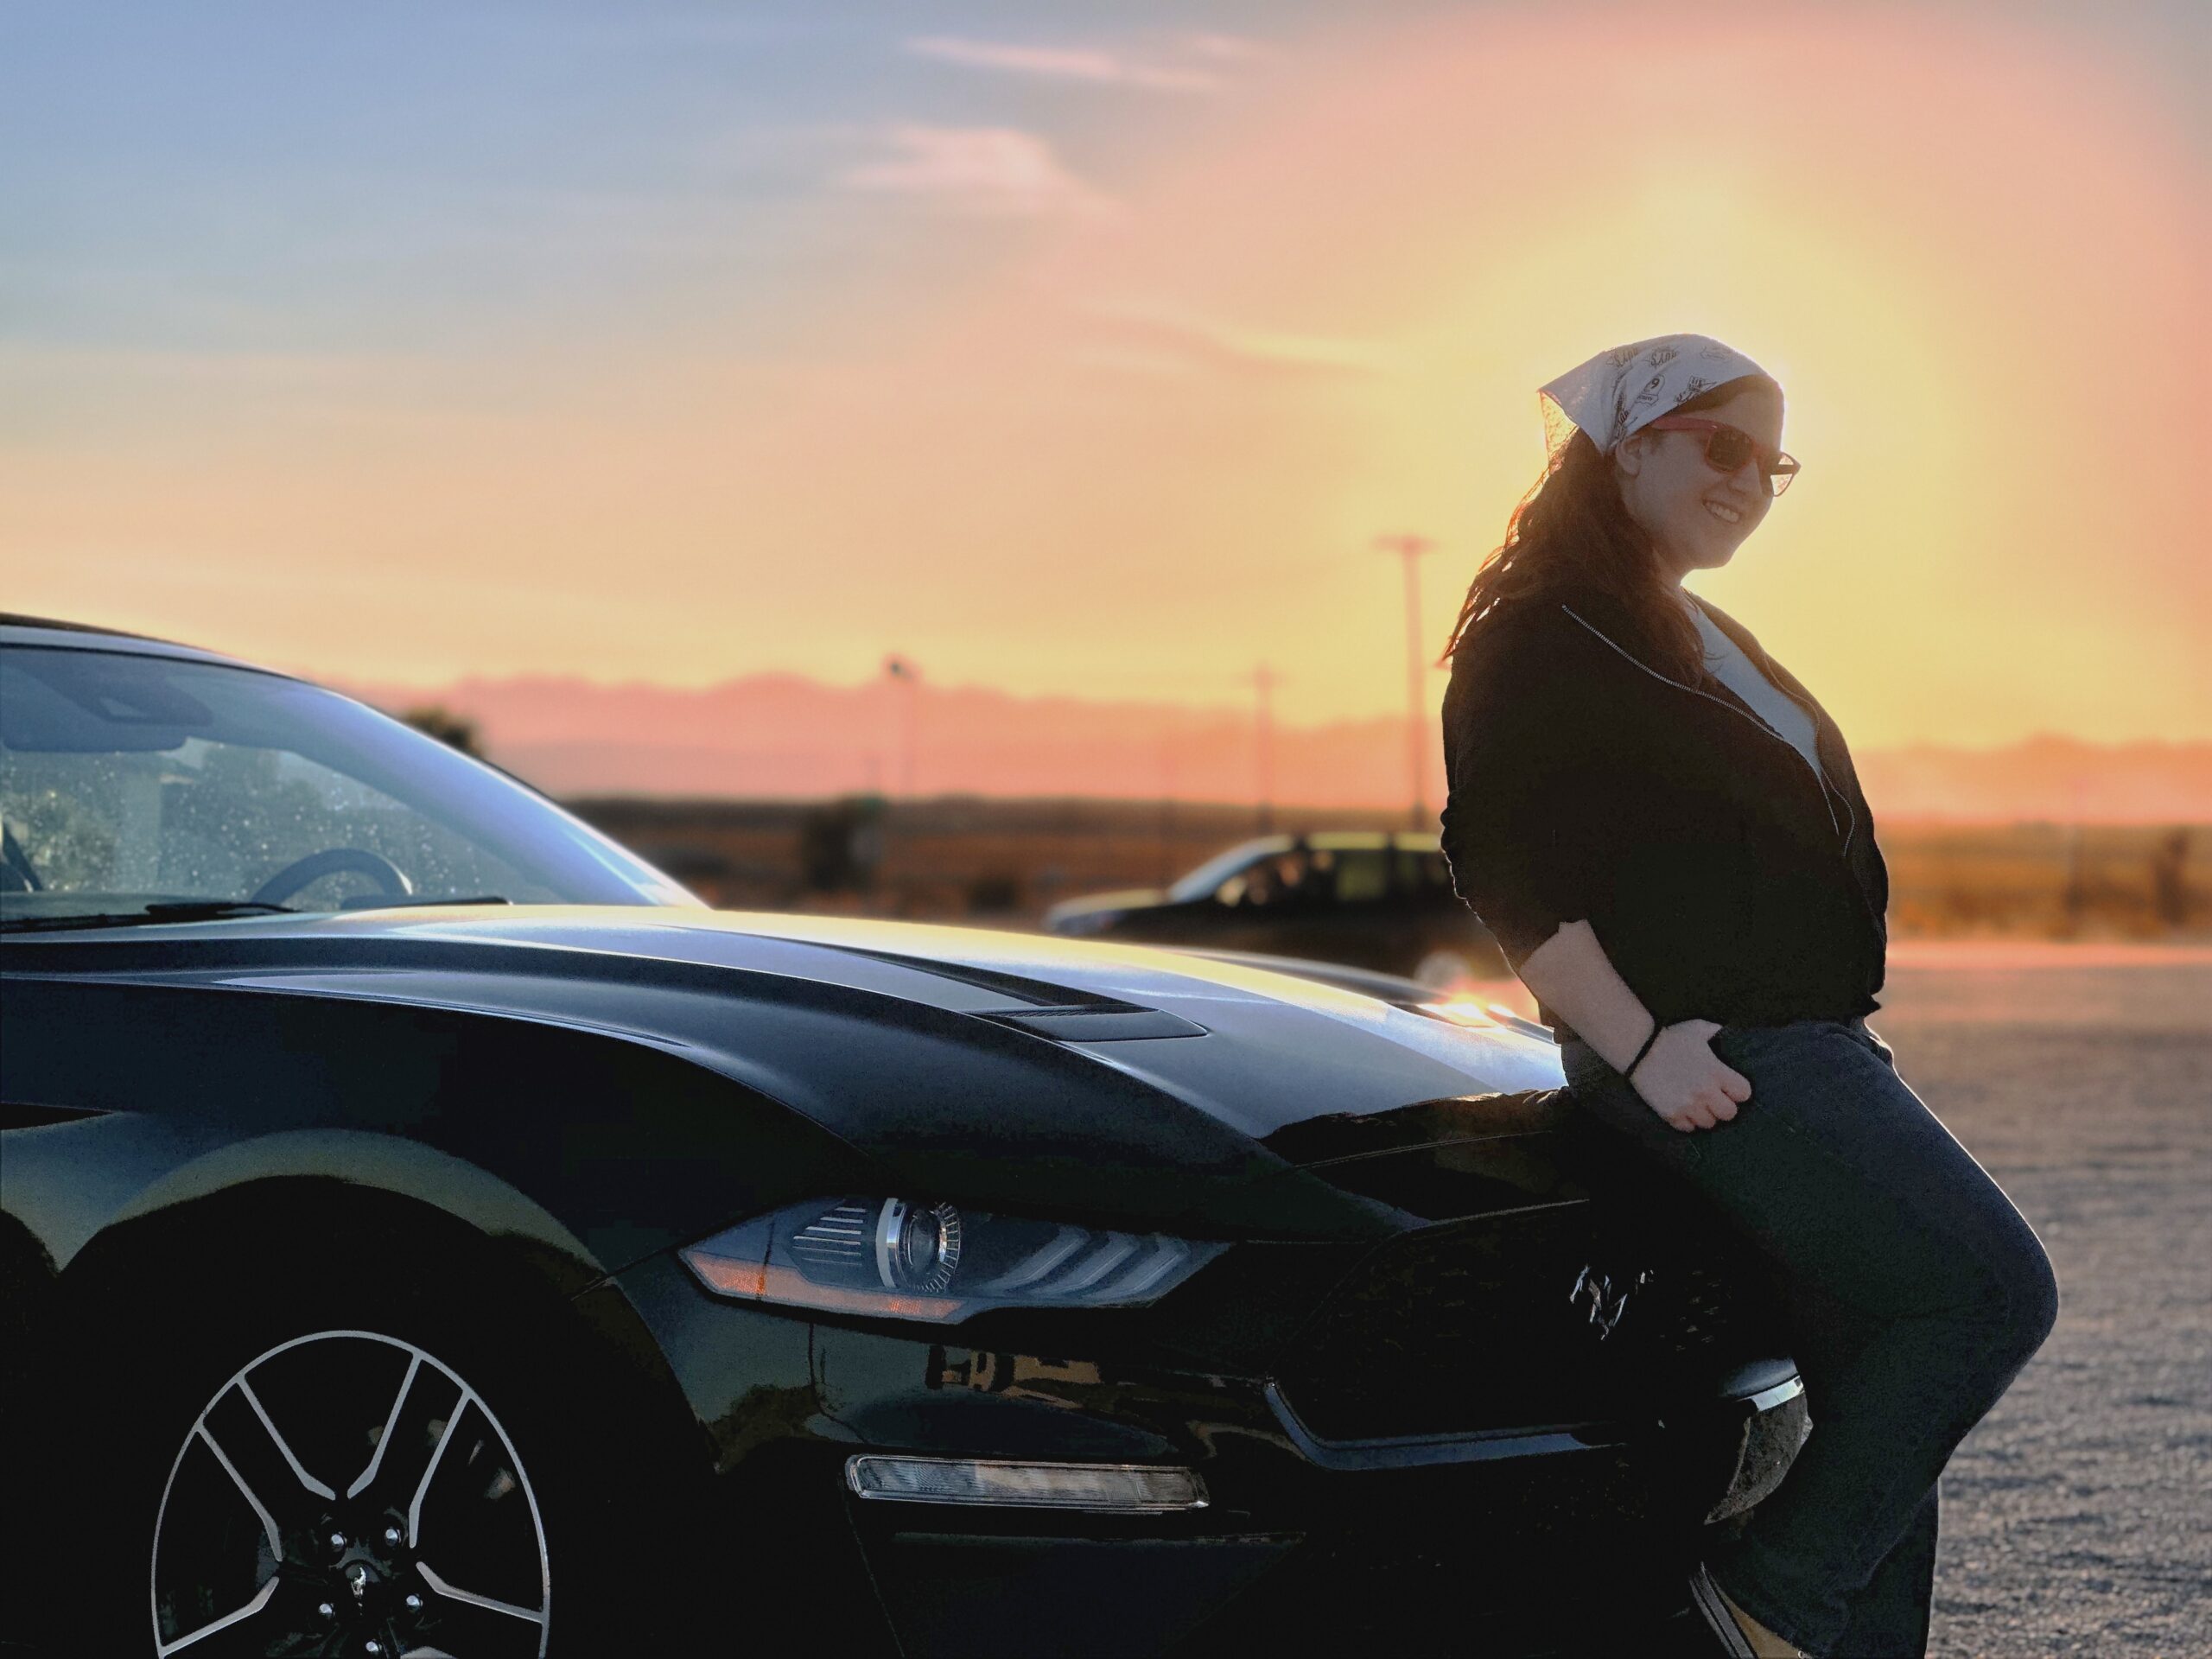 We rented a Mustang.